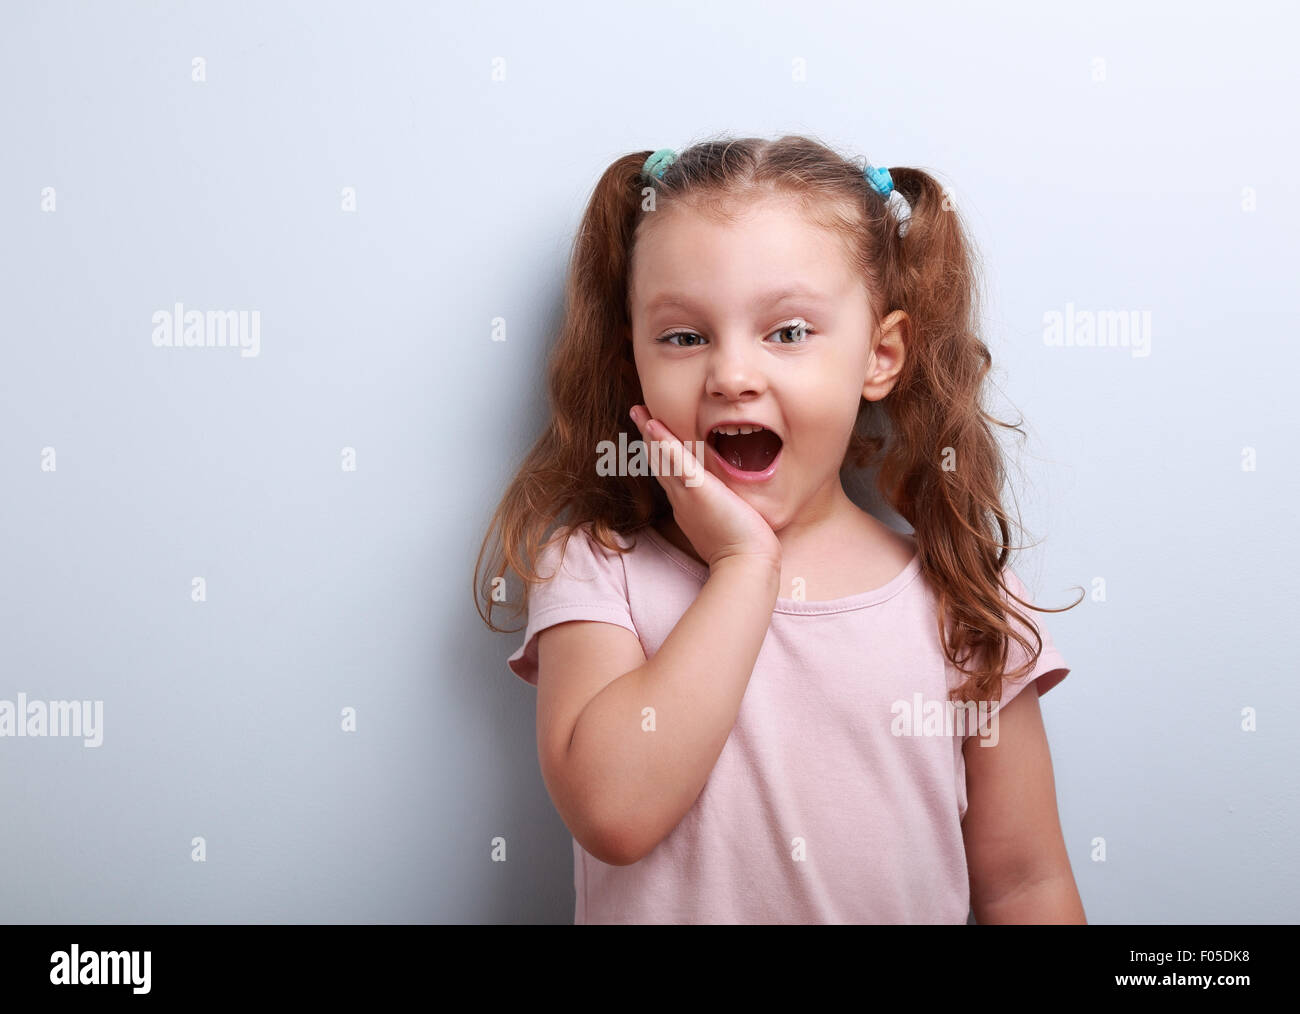 Surprising fun girl looking with open mouth on blue background Stock Photo